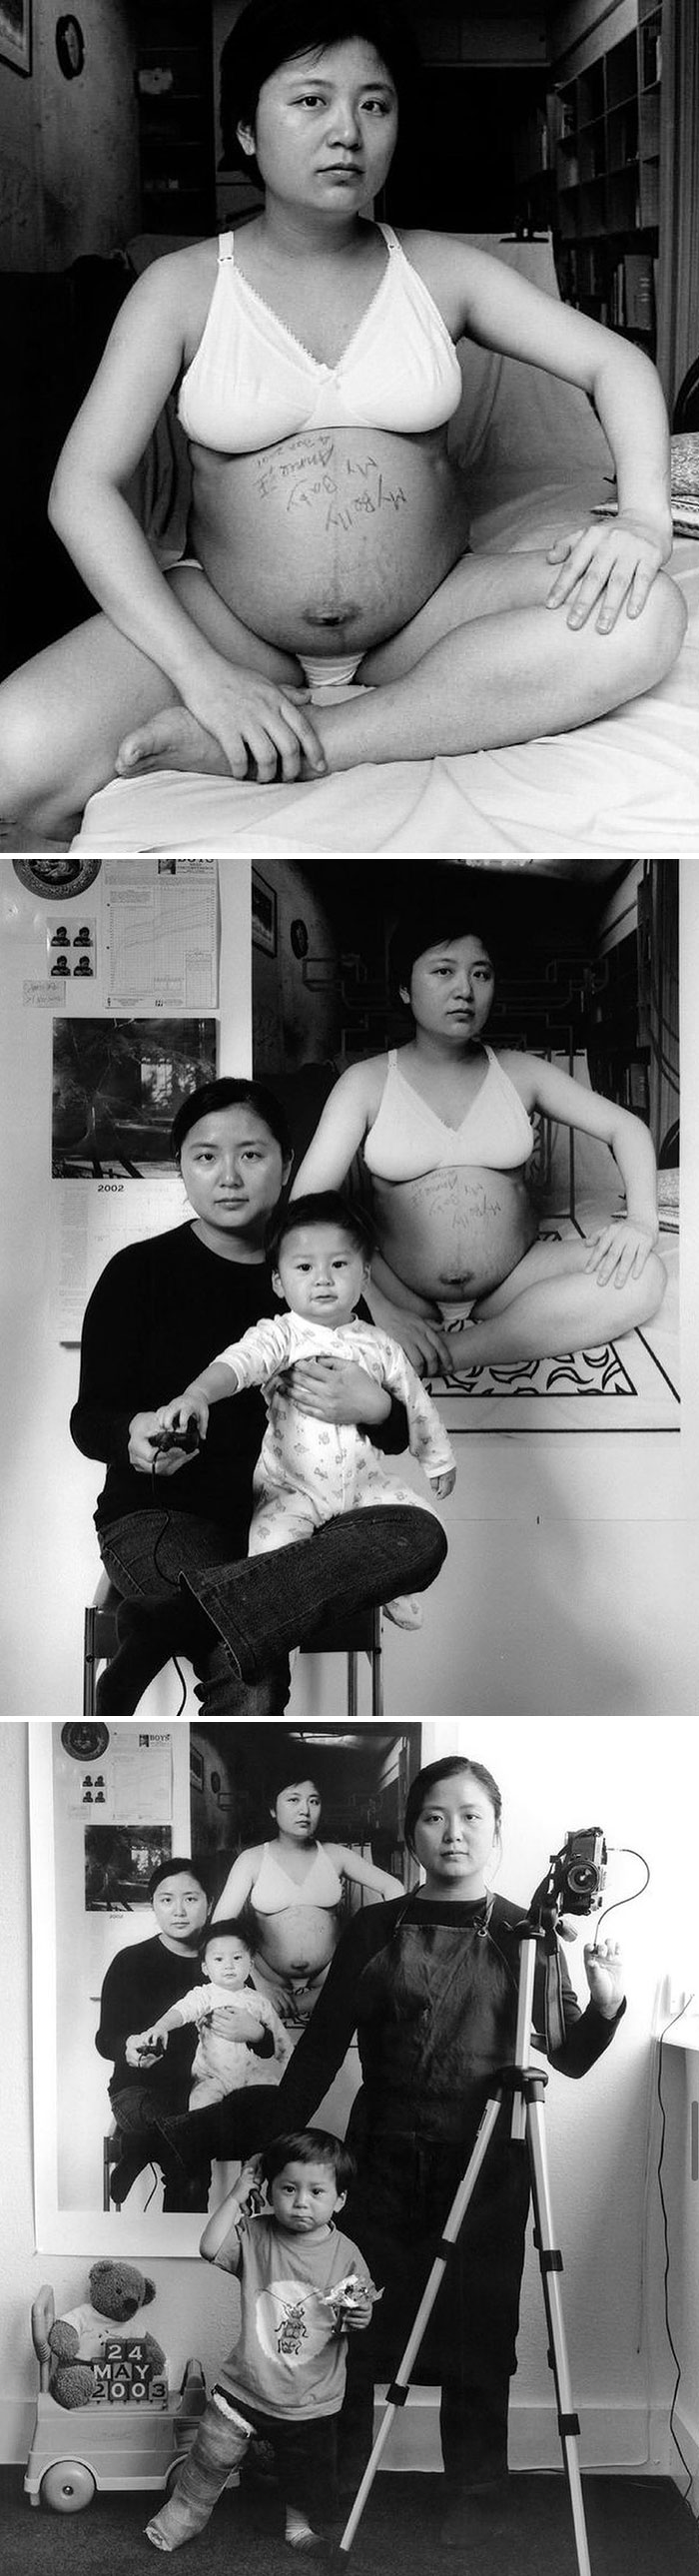 The Mother As A Creator By Annie Wang, She Started A 17-Year Project Before Her Son Was Born, Documenting Her Child Growing Up, Taiwan, 2001